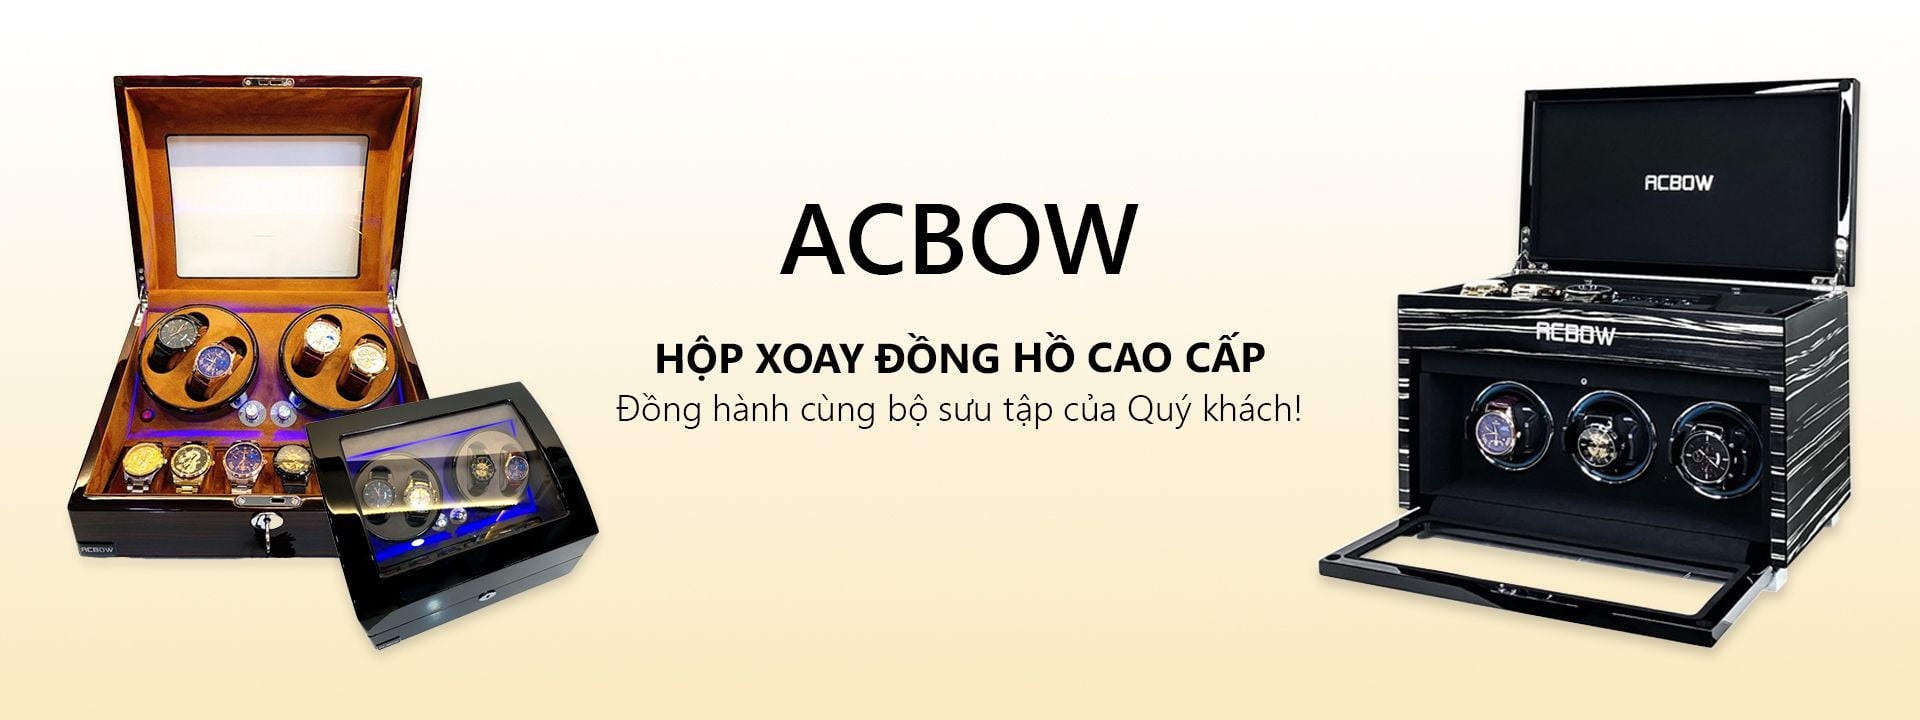 ACBOW - Hộp xoay đồng hồ cơ cao cấp